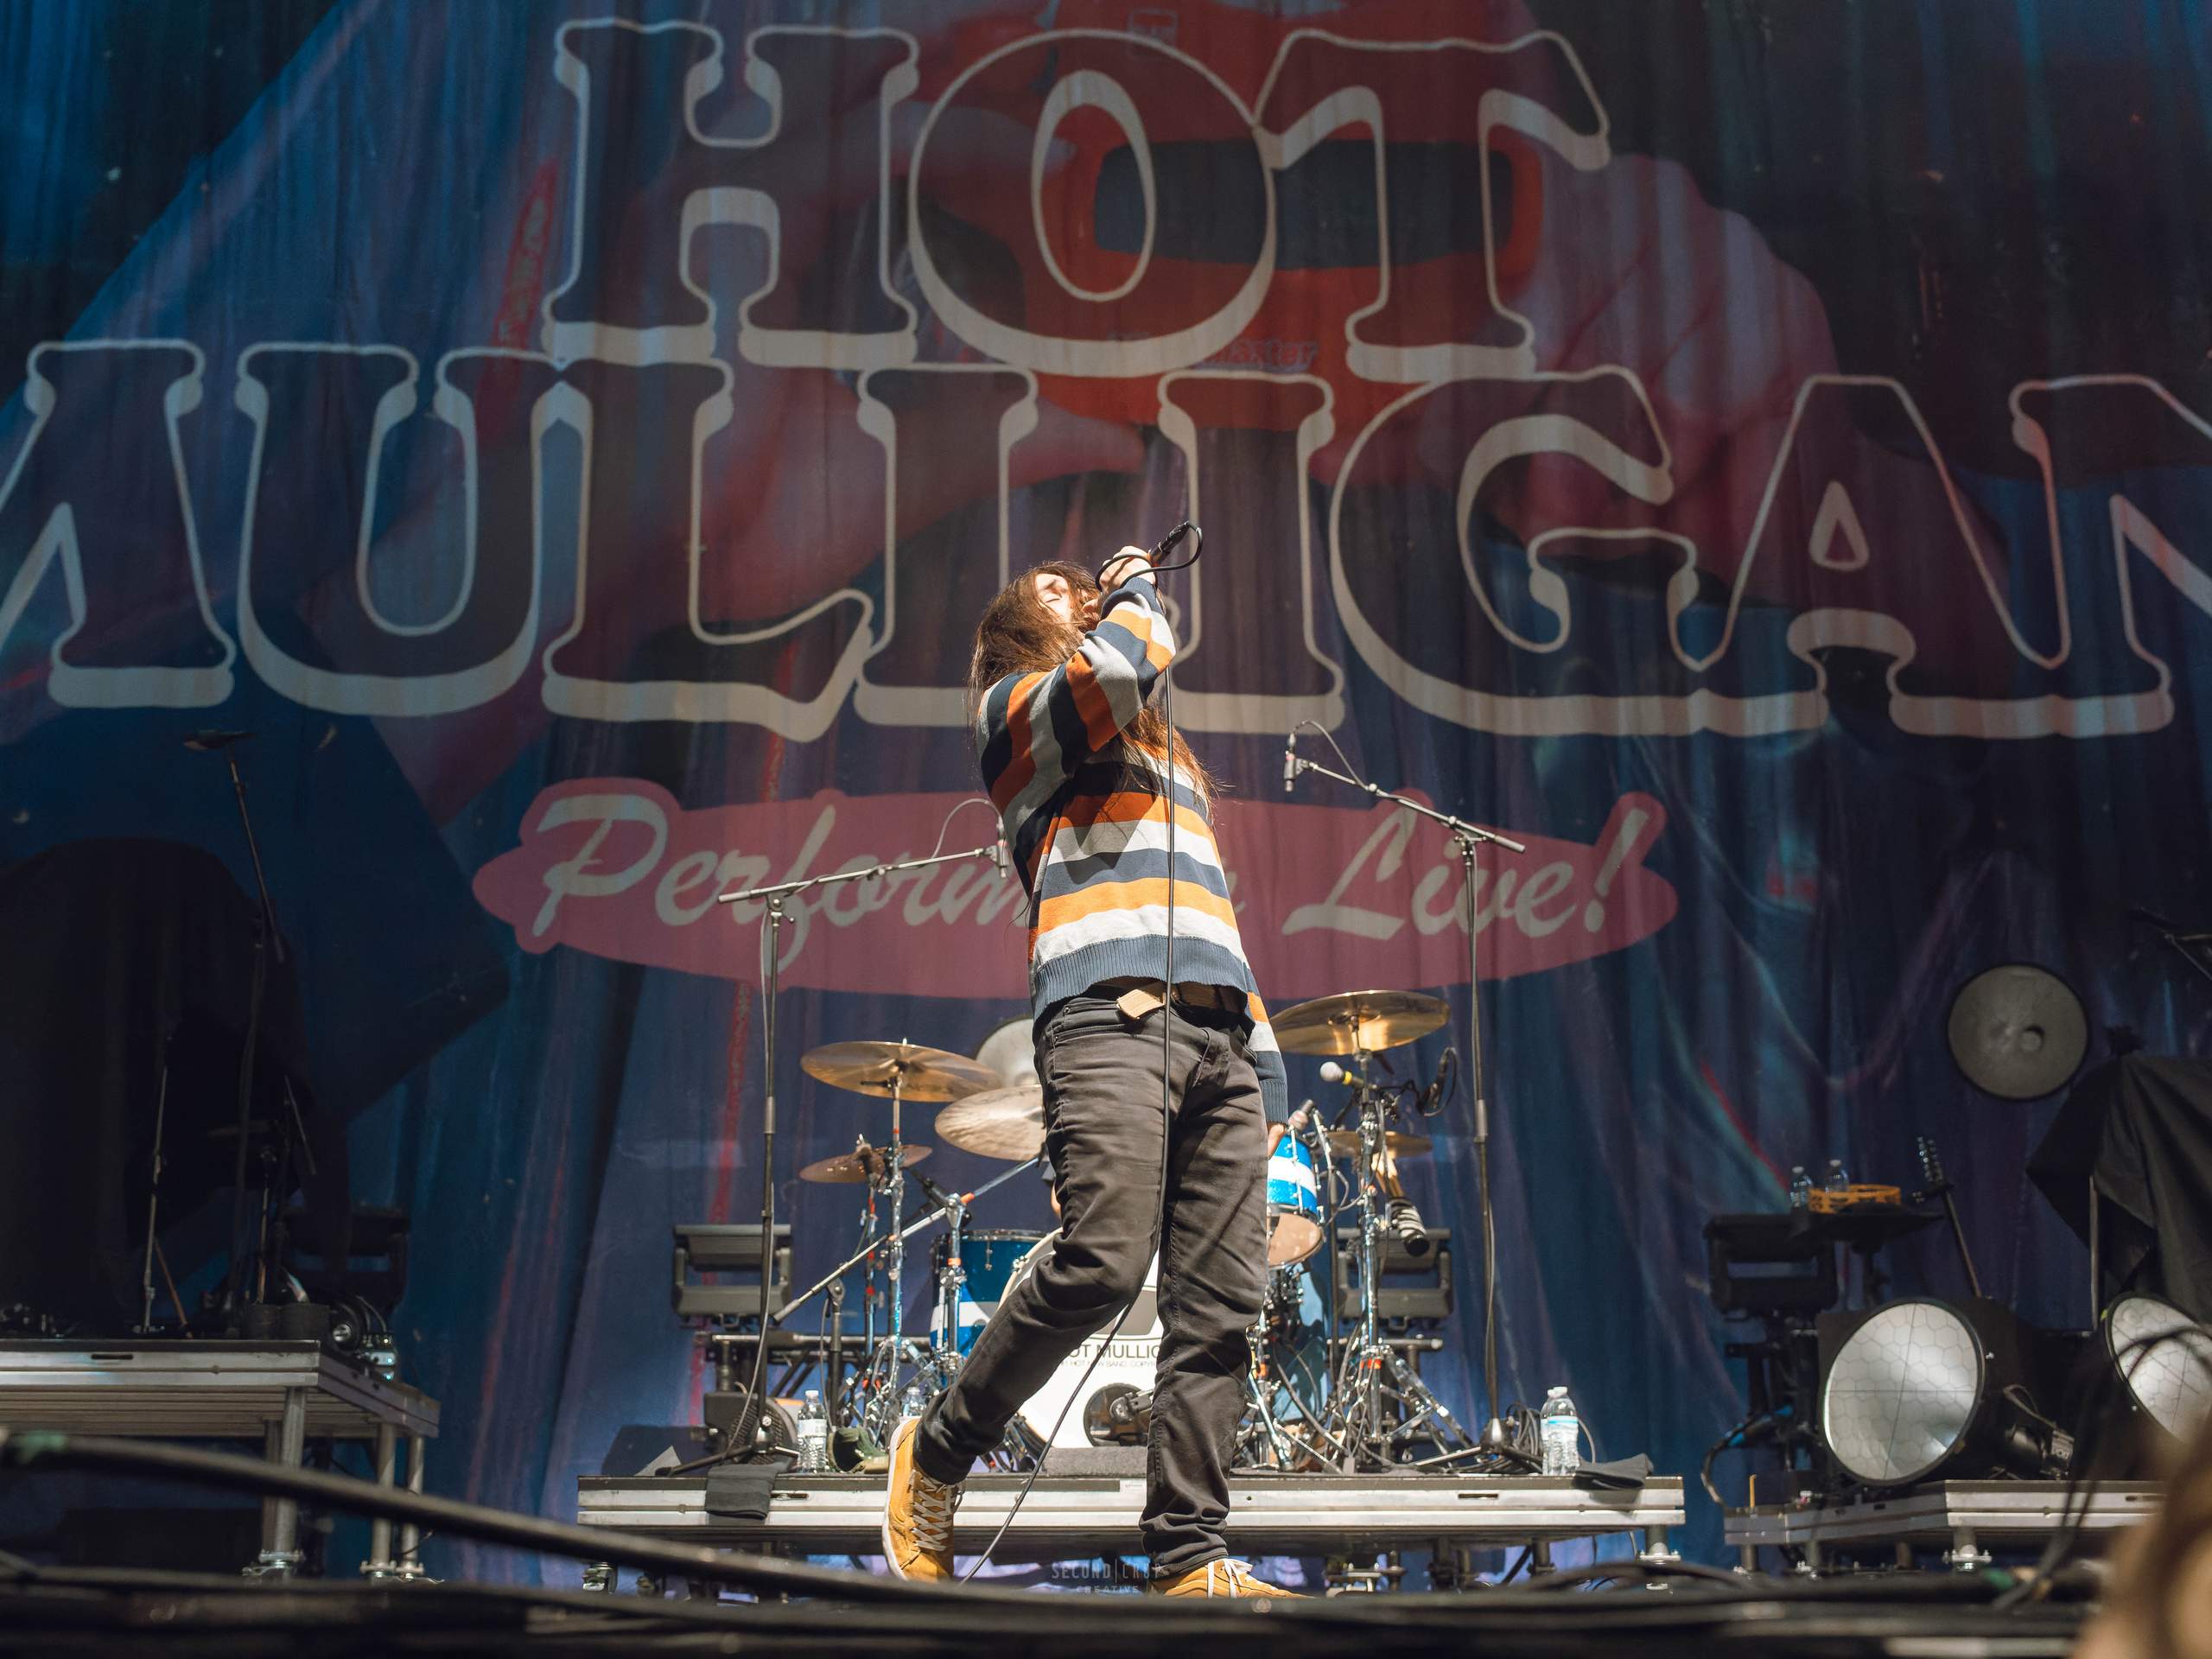 Hot Mulligan performing at Fiserv Forum on April 2, 2024 as part of Fall Out Boy's SO MUCH FOR (2OUR) DUST tour, photography by Ross Harried for Second Crop Music